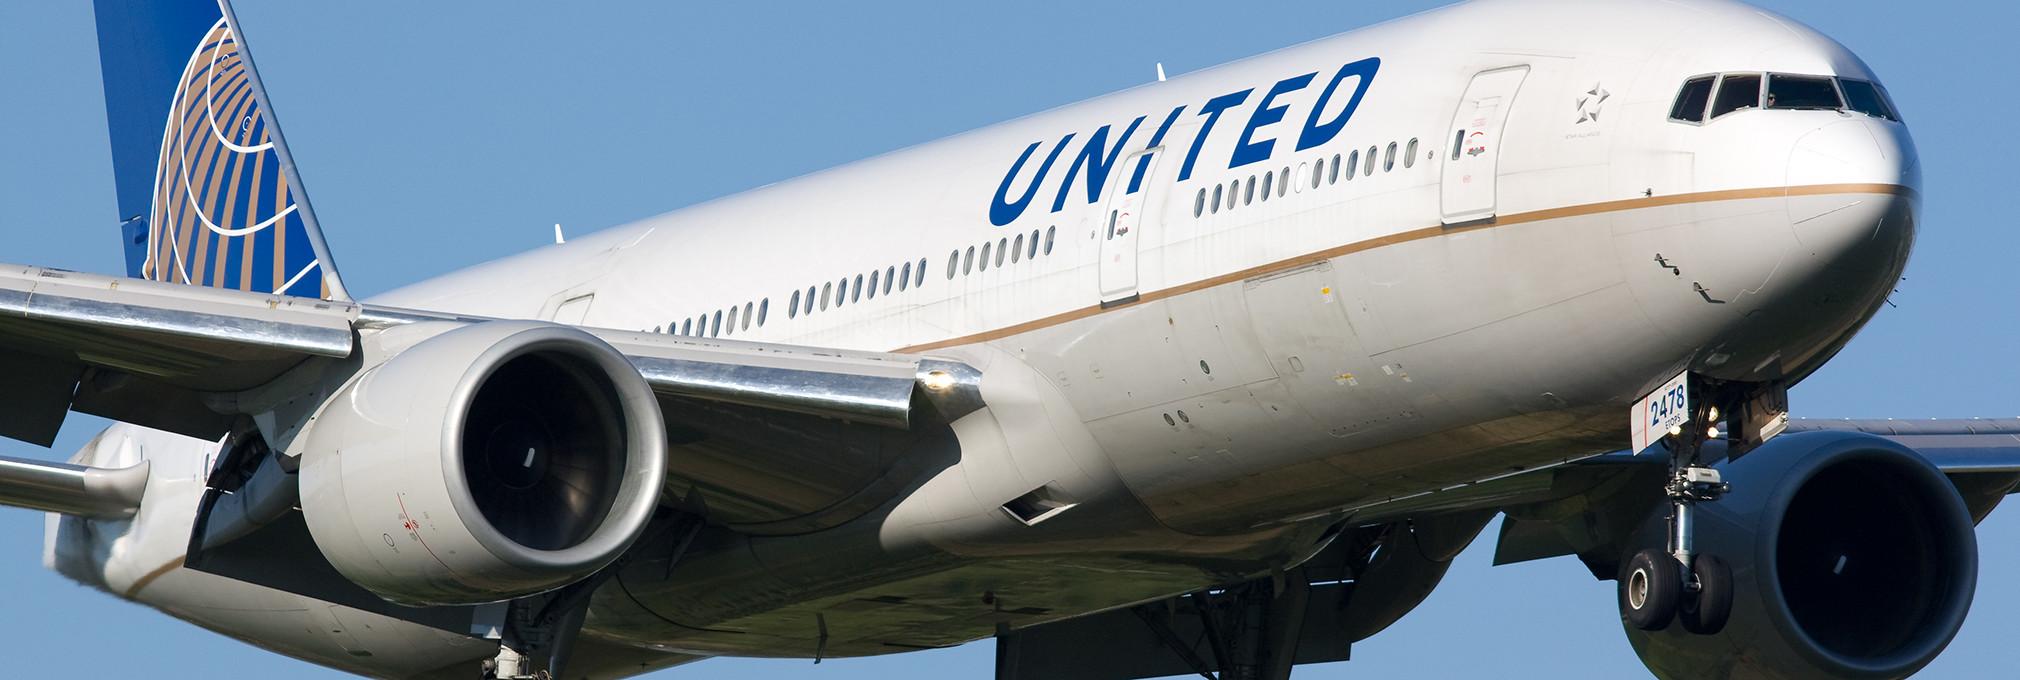 united airlines restricts women came wearing leggings